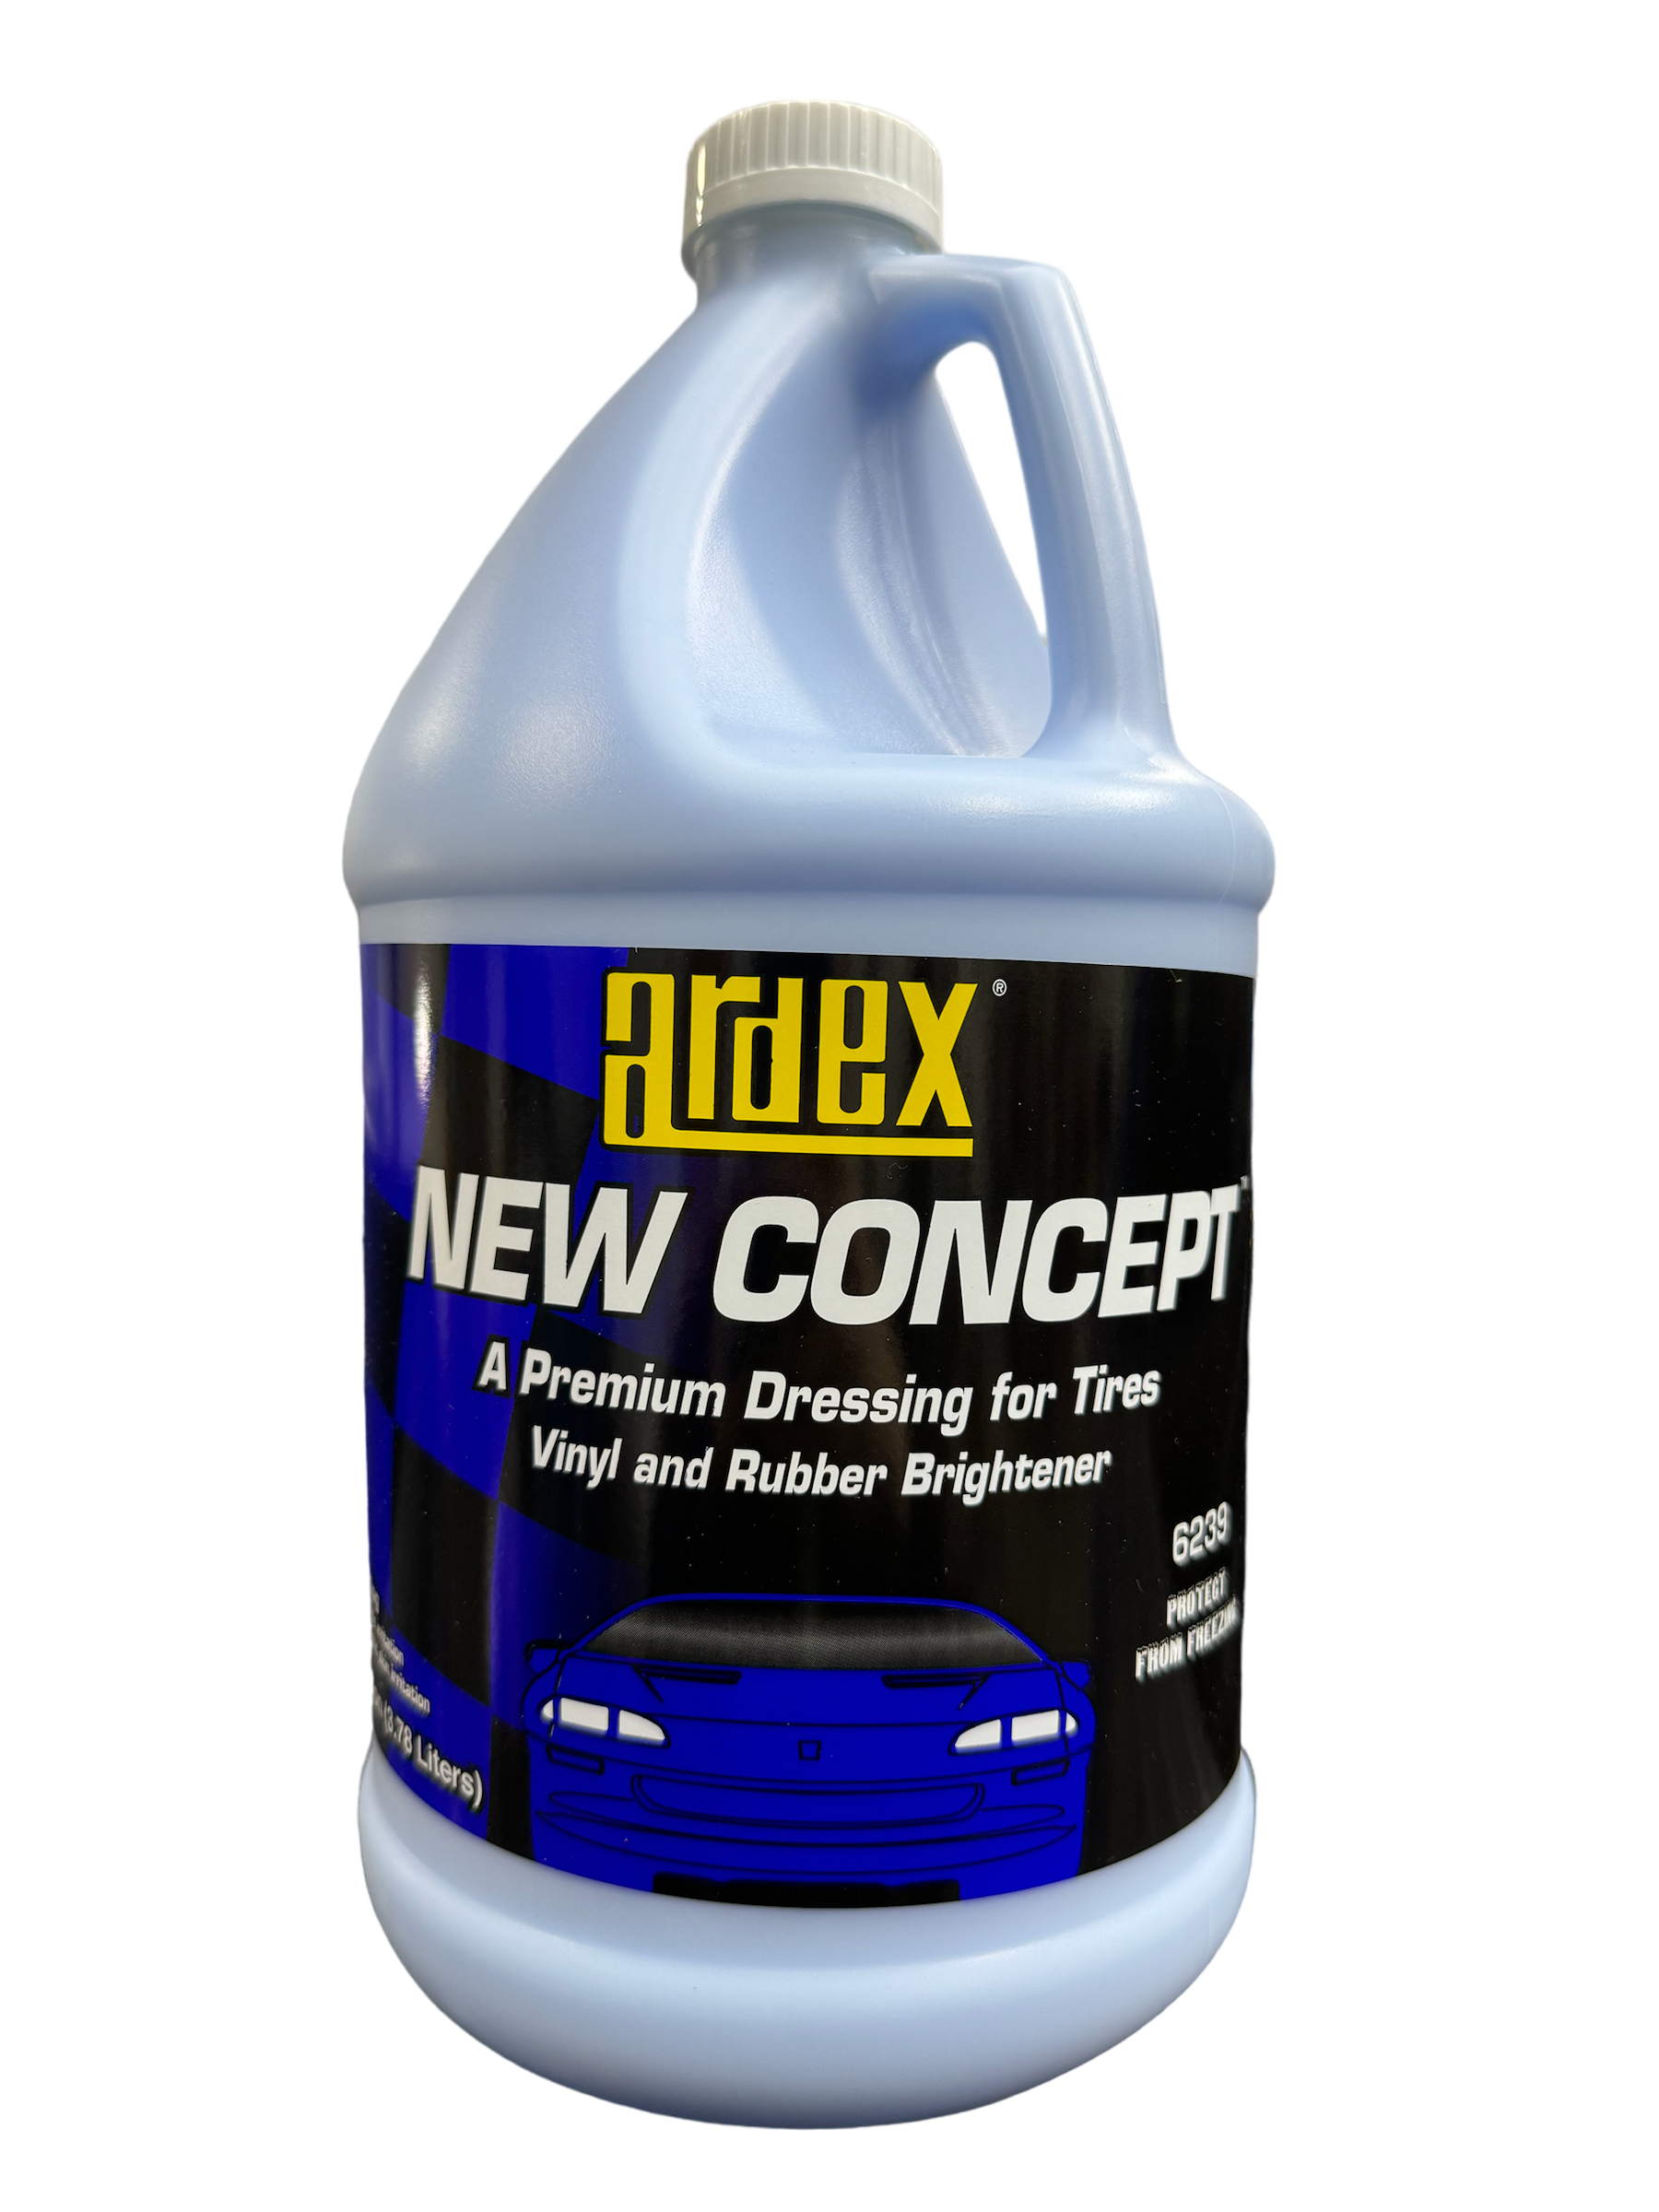 Ardex New Concept Tire Dressing